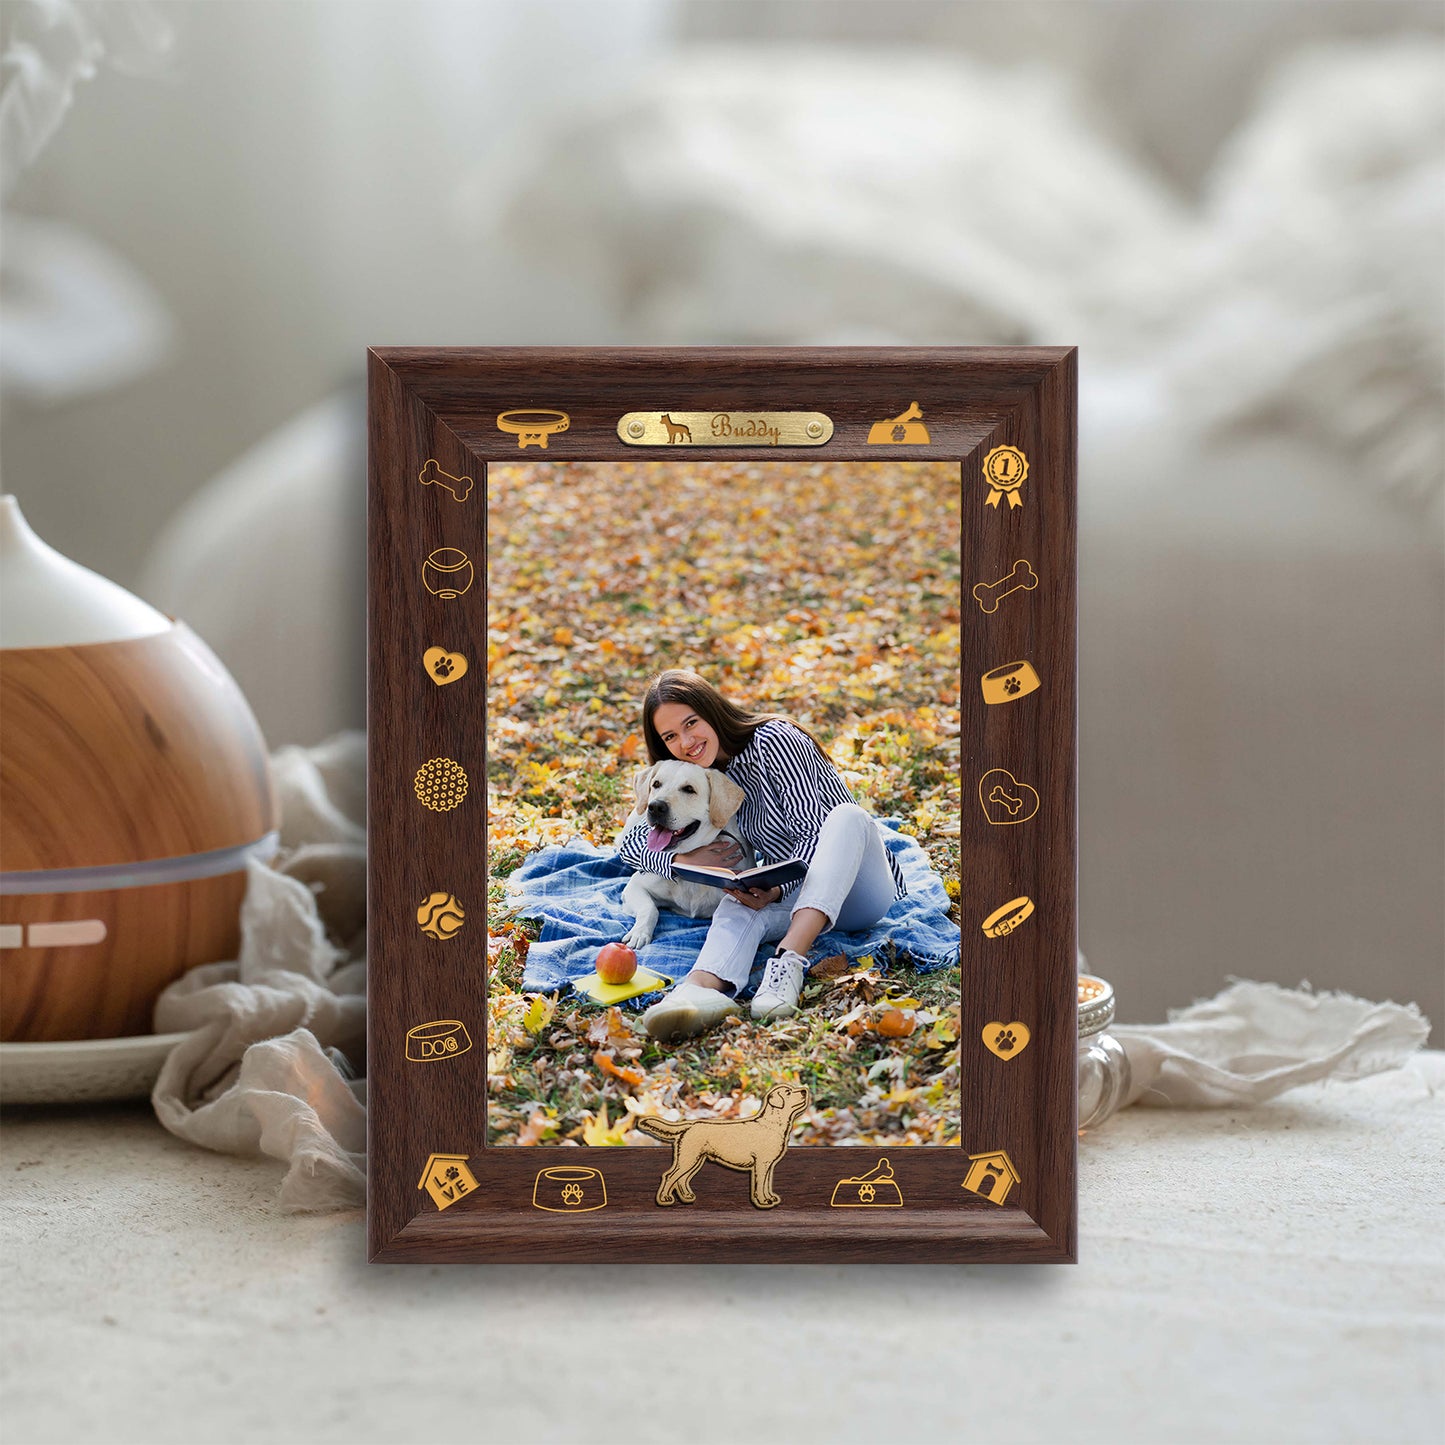 photo frame wall decor Dotride Custom Picture Frame, Wood Photo Frame with Custom Wooden Carving, Can be engraved with any text you want, suitable for Suitable for Various Themes, Golden Retriever